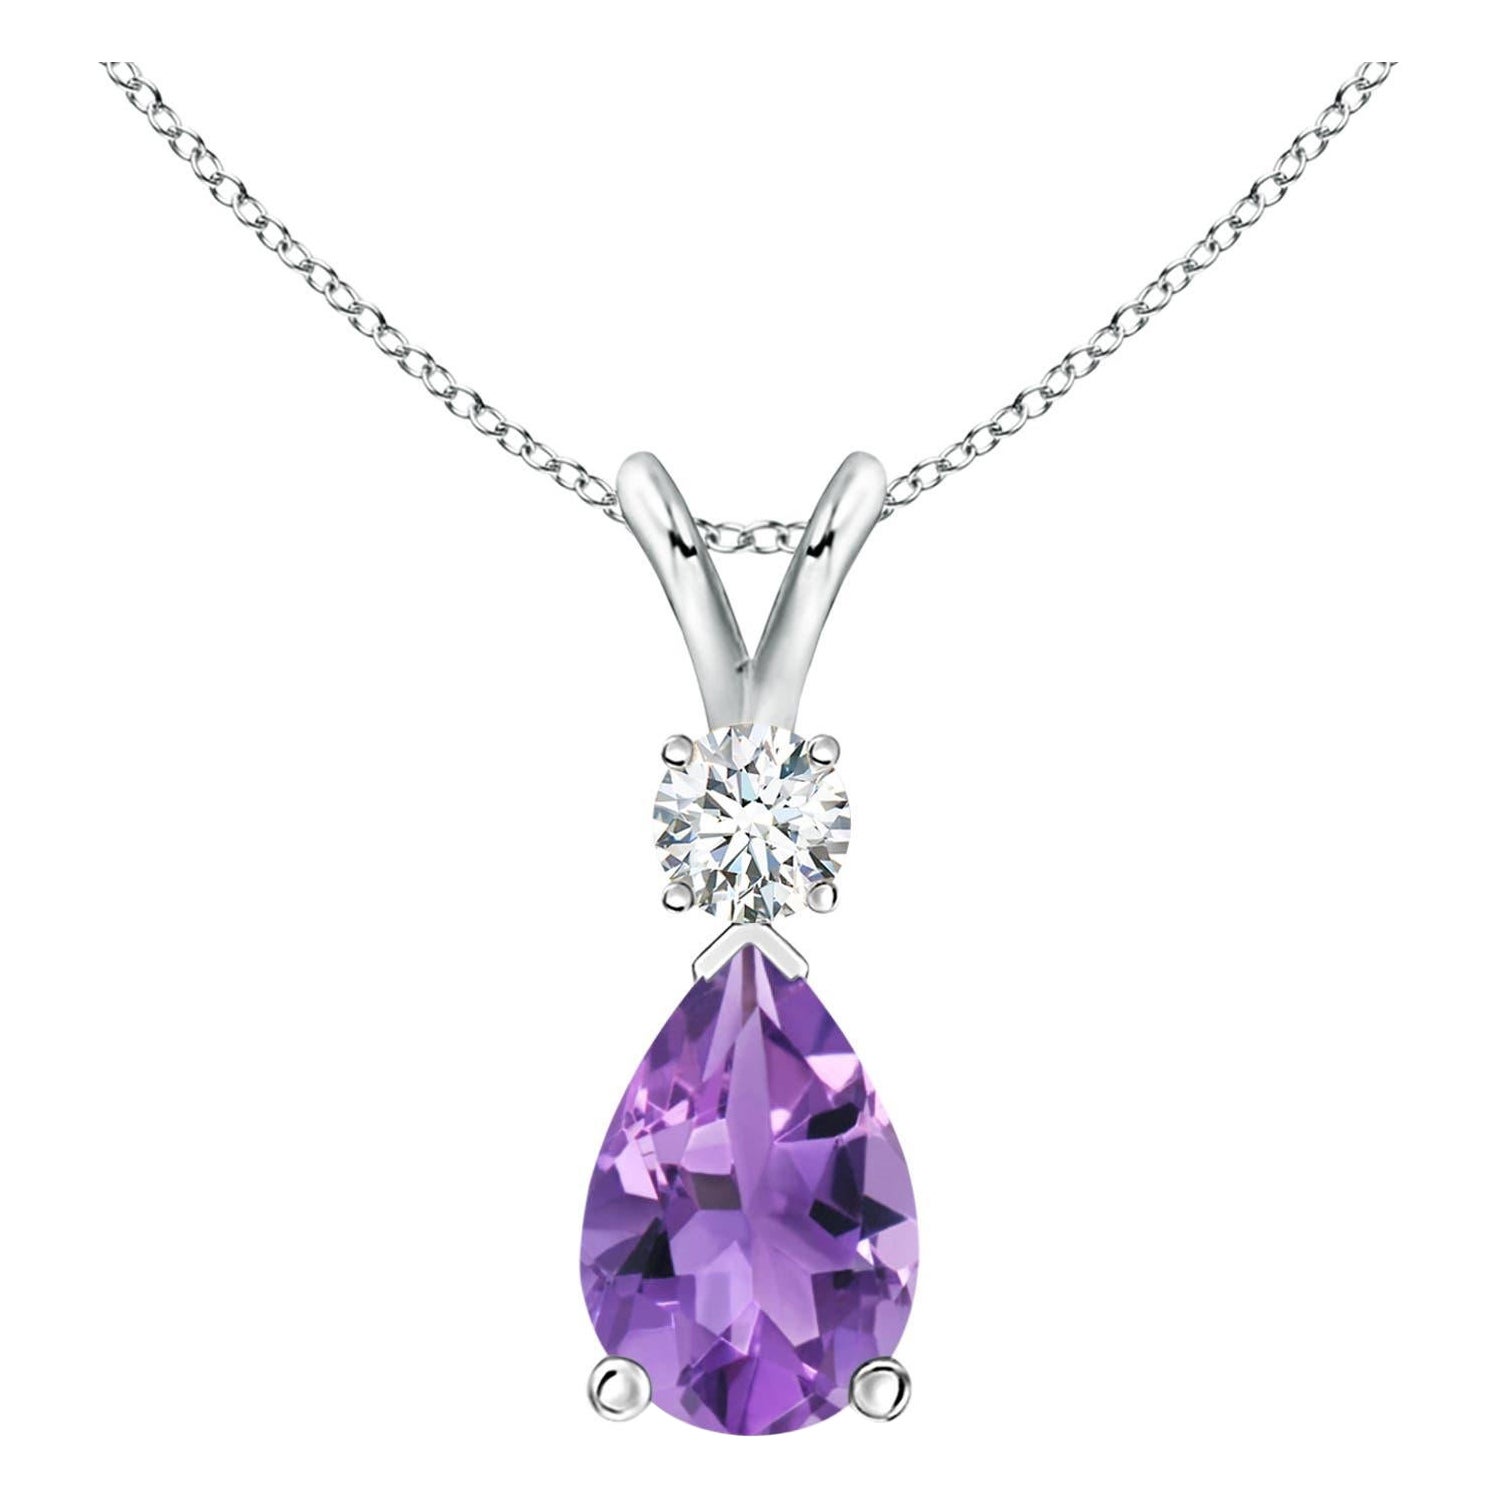 Natural 2.6 ct Amethyst Teardrop Pendant with Diamond in 925 Sterling Silver For Sale